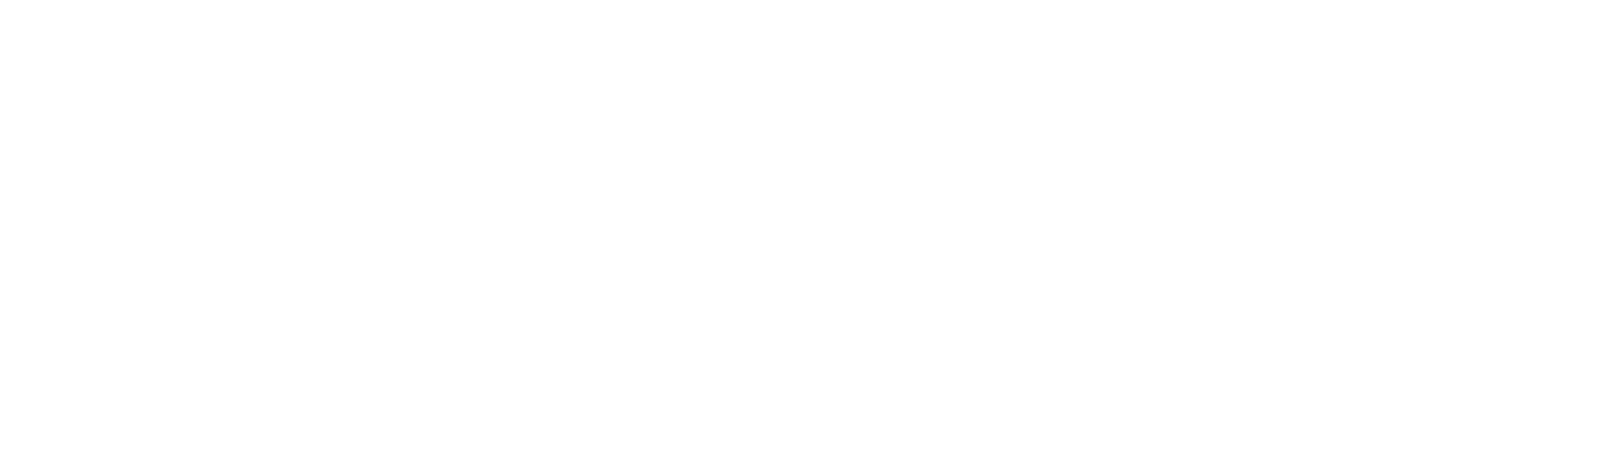 center-for-action-and-contemplation